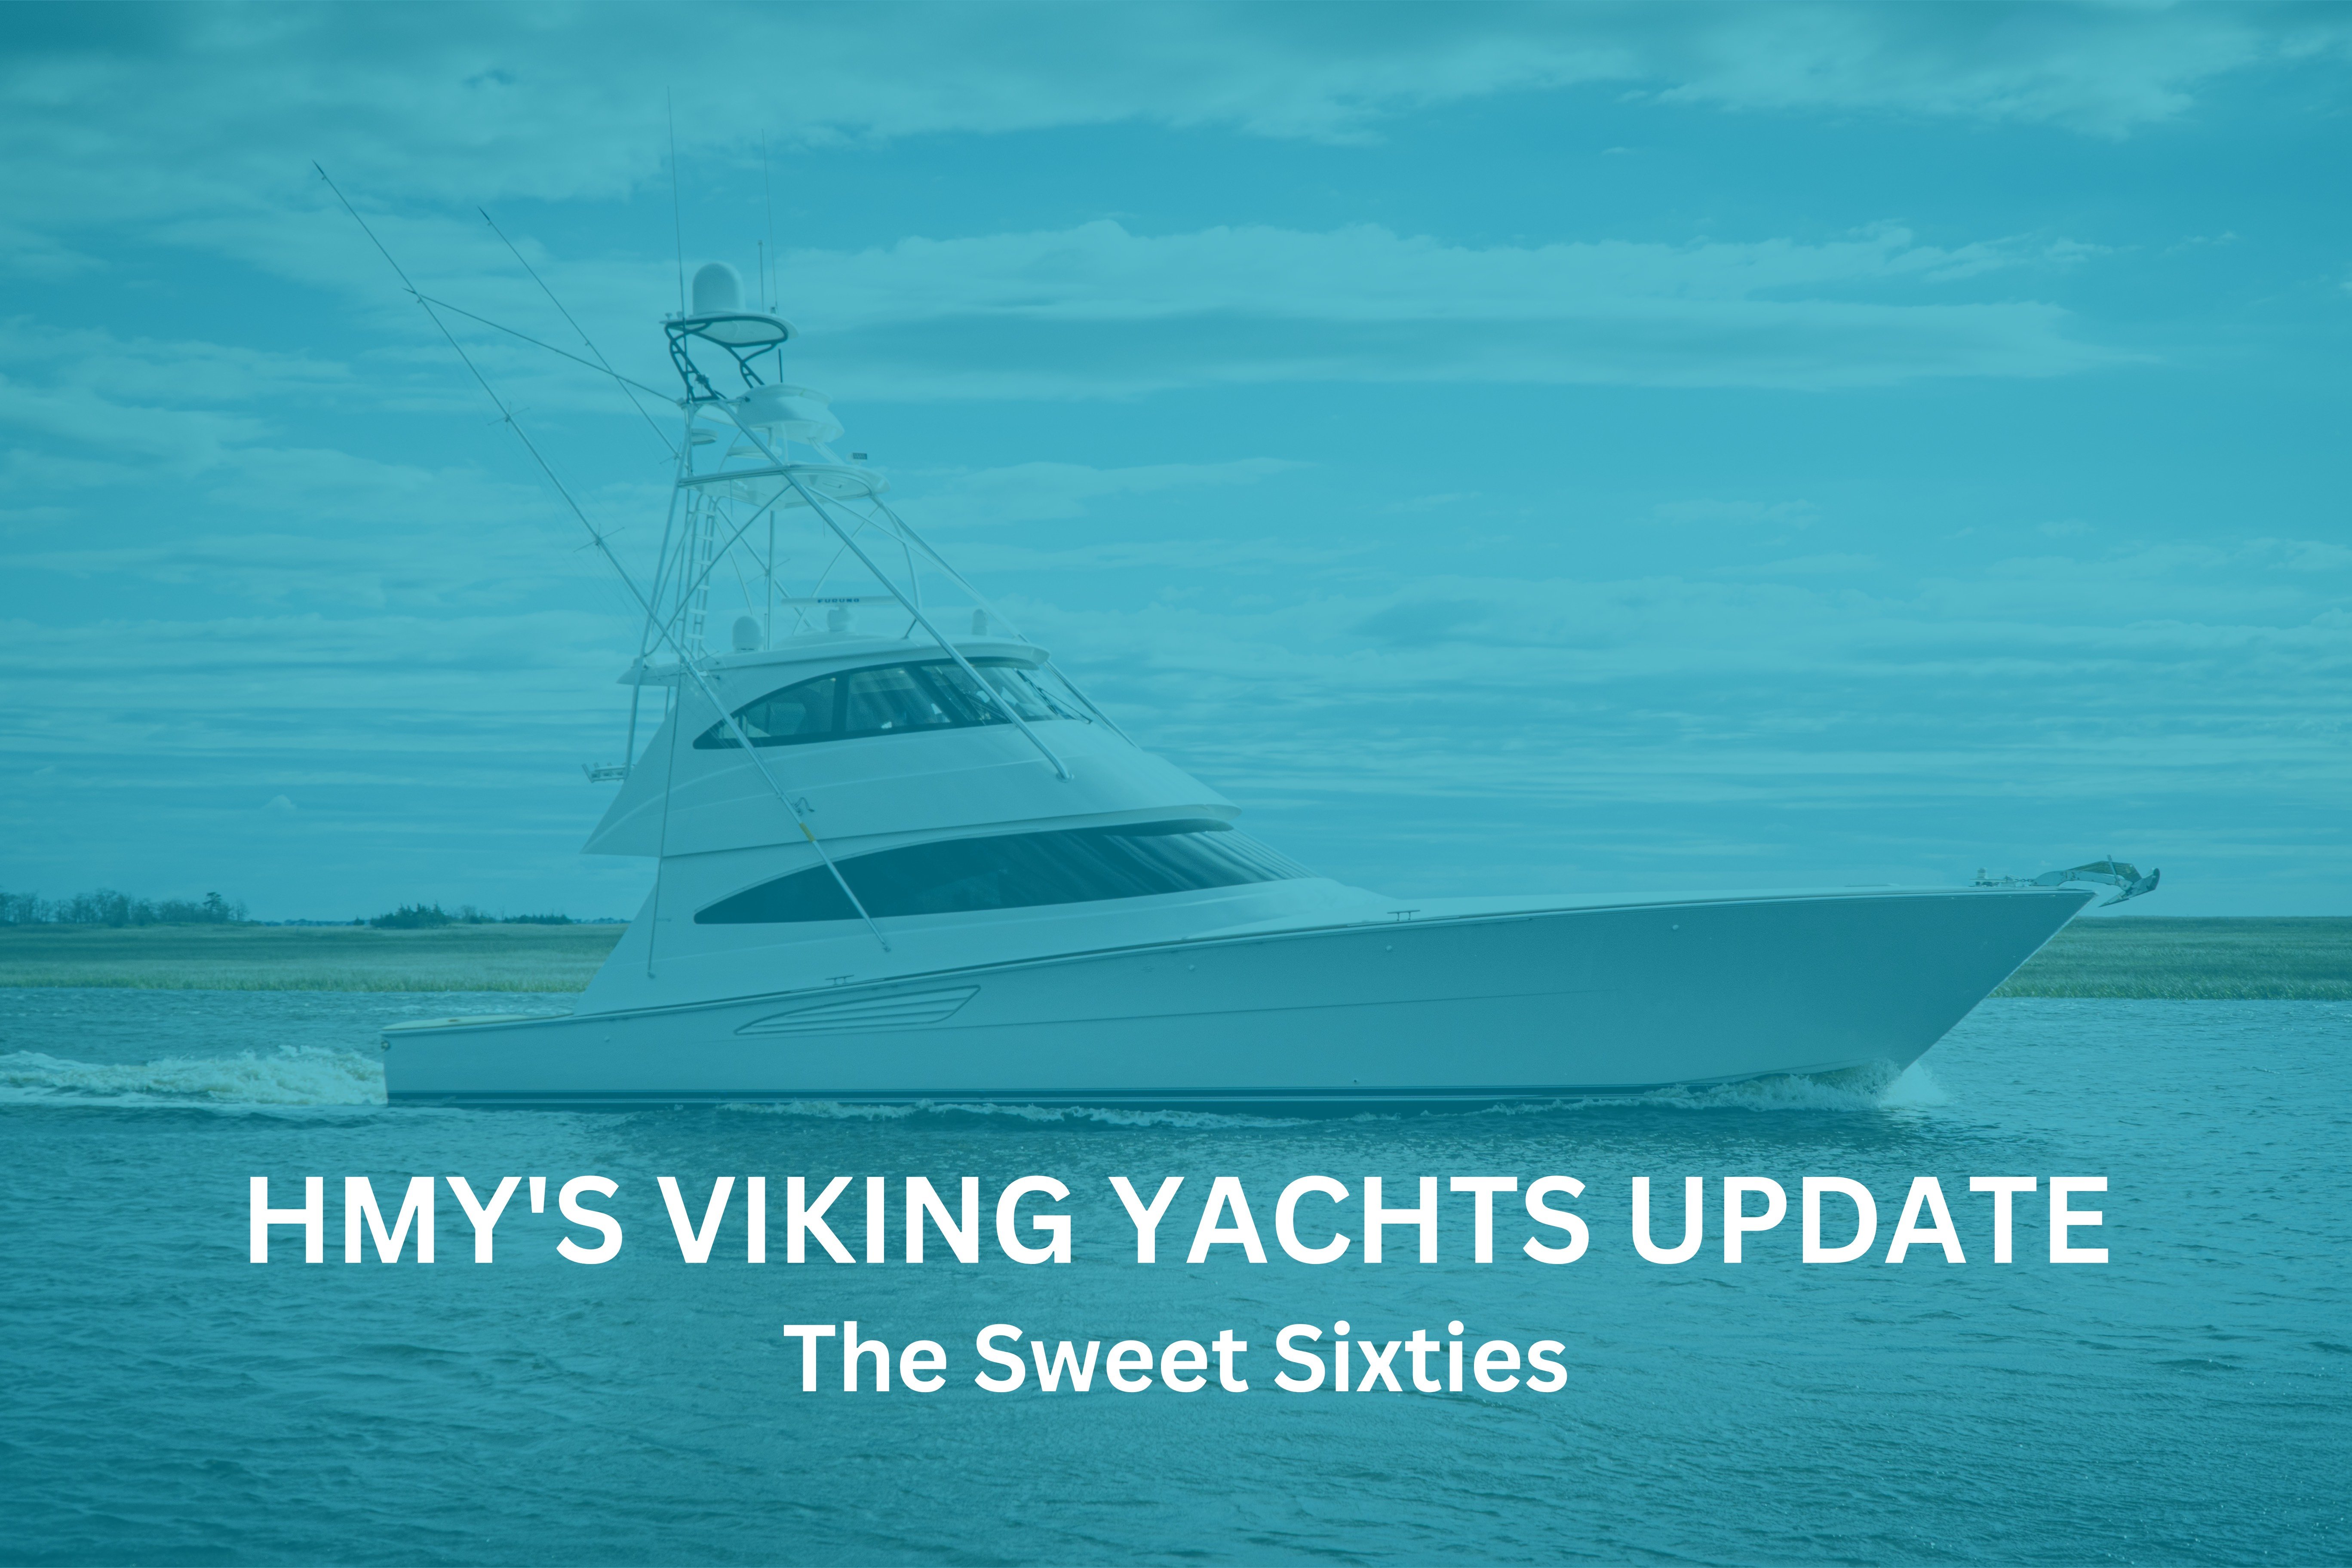 HMY’s Viking Yachts Update: The Sweet Sixties